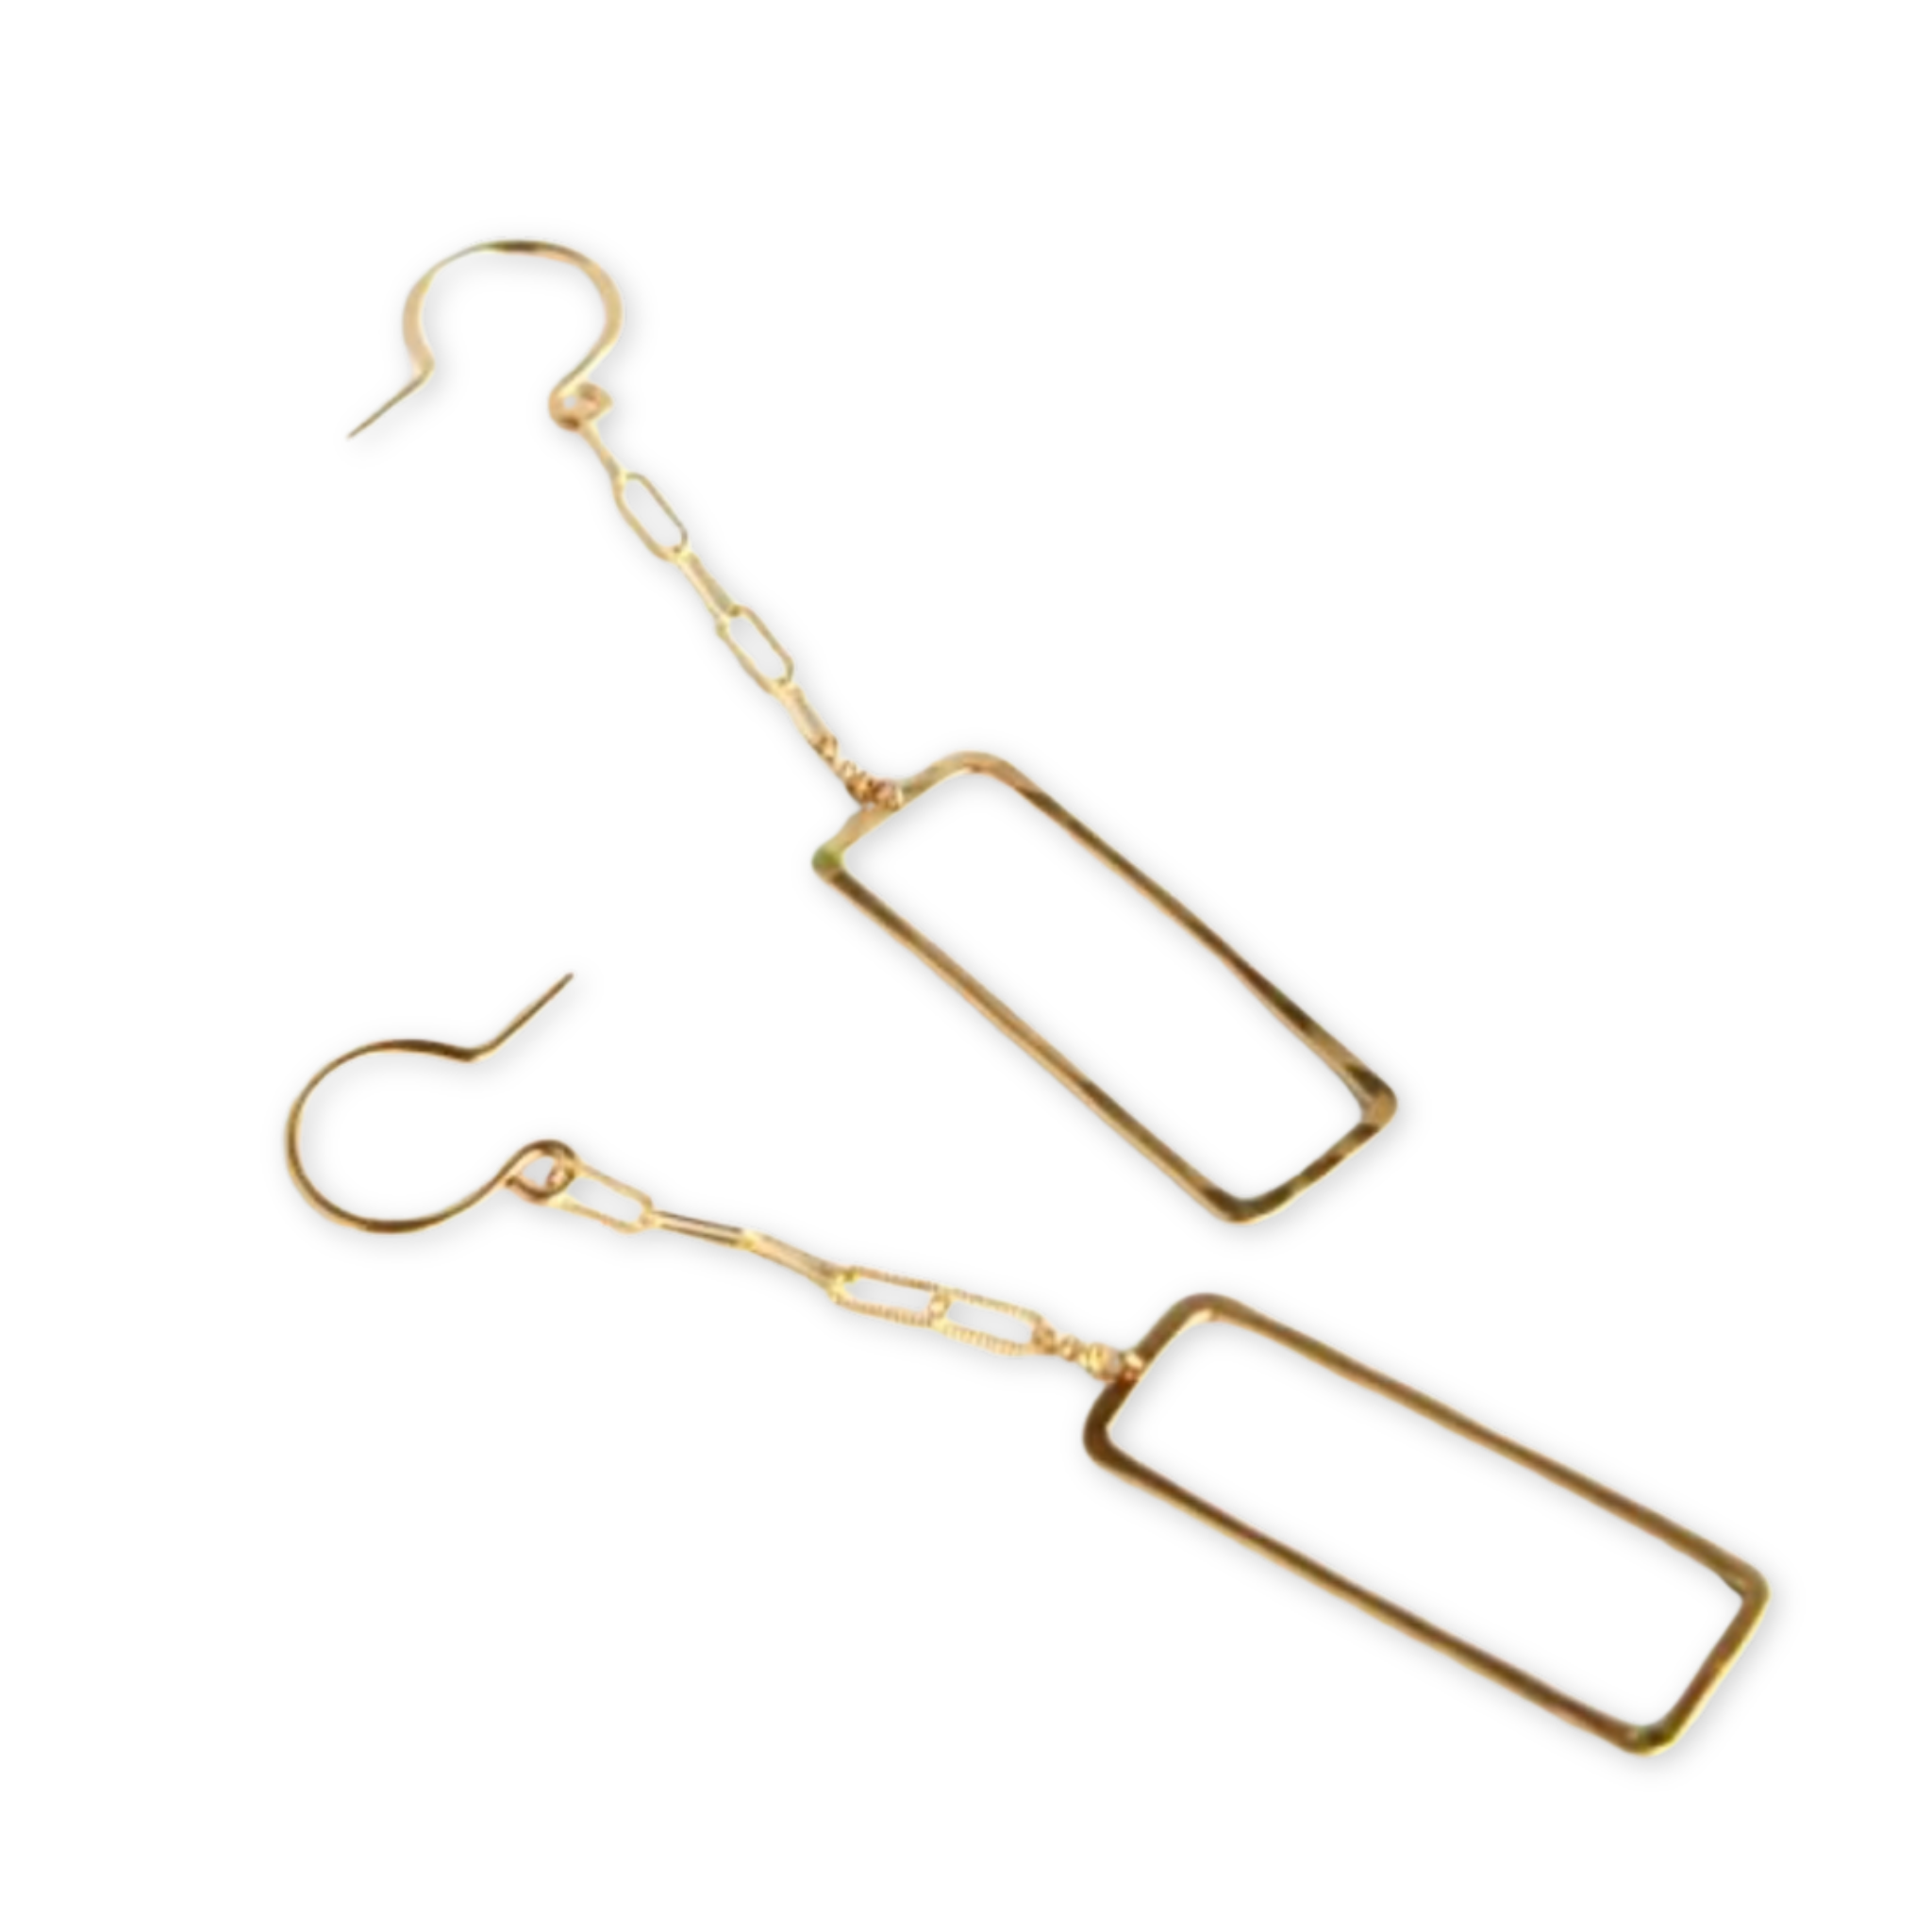 delicate rectangle cutout pendants hanging from a simple rectangular chain and ear wirend